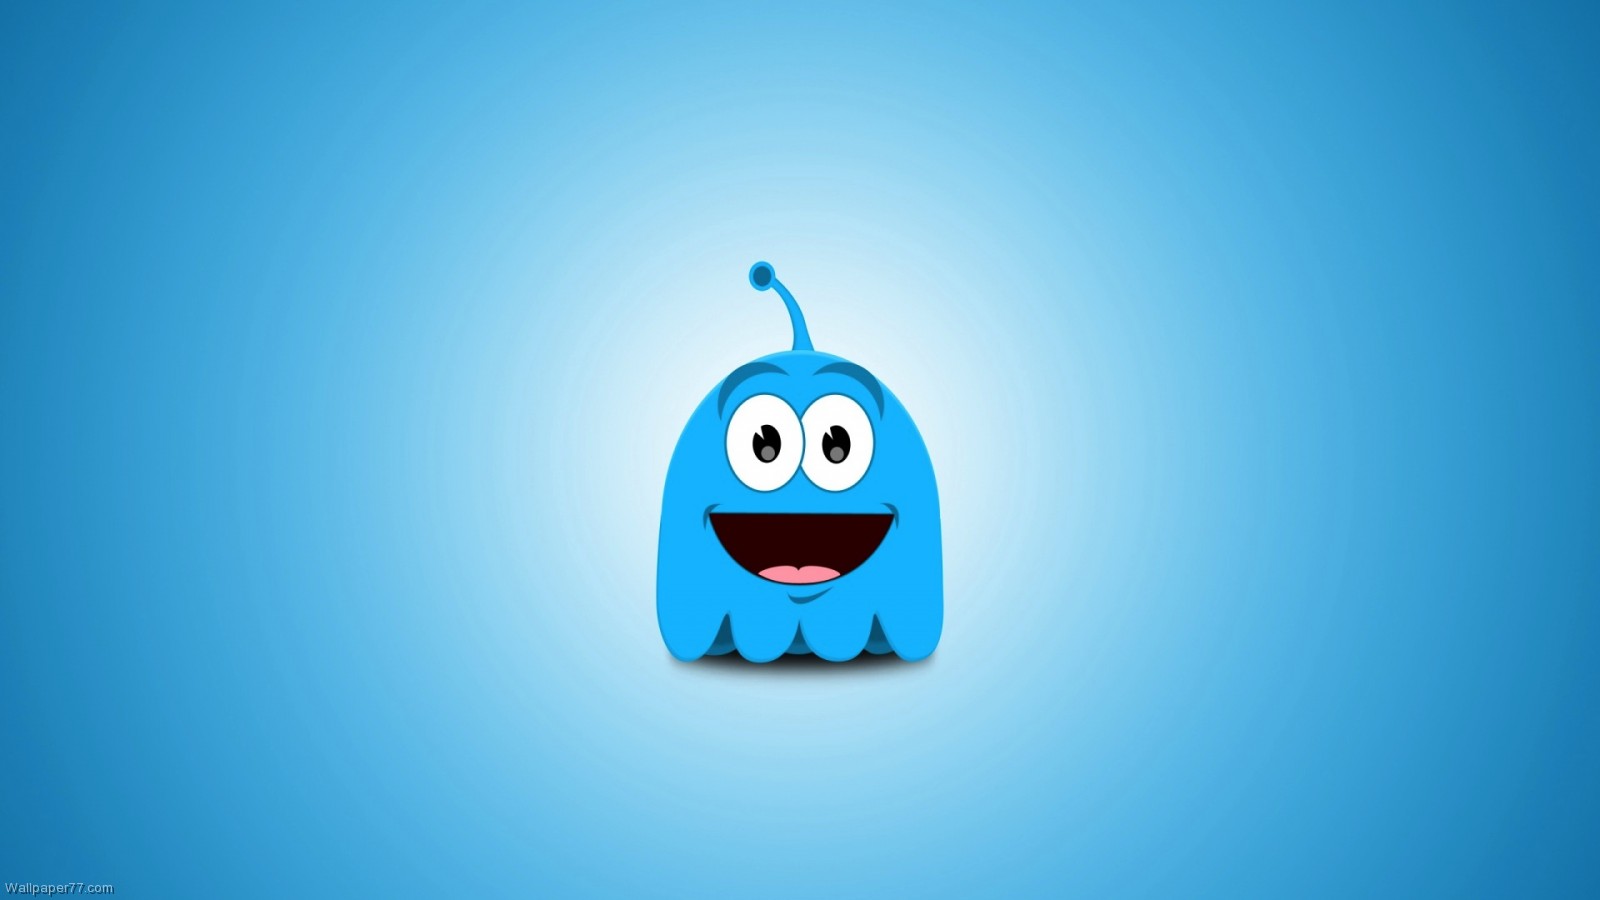 Pixels : Wallpapers Tagged Cute, Fun Wallpapers, Funny Wallpapers ...